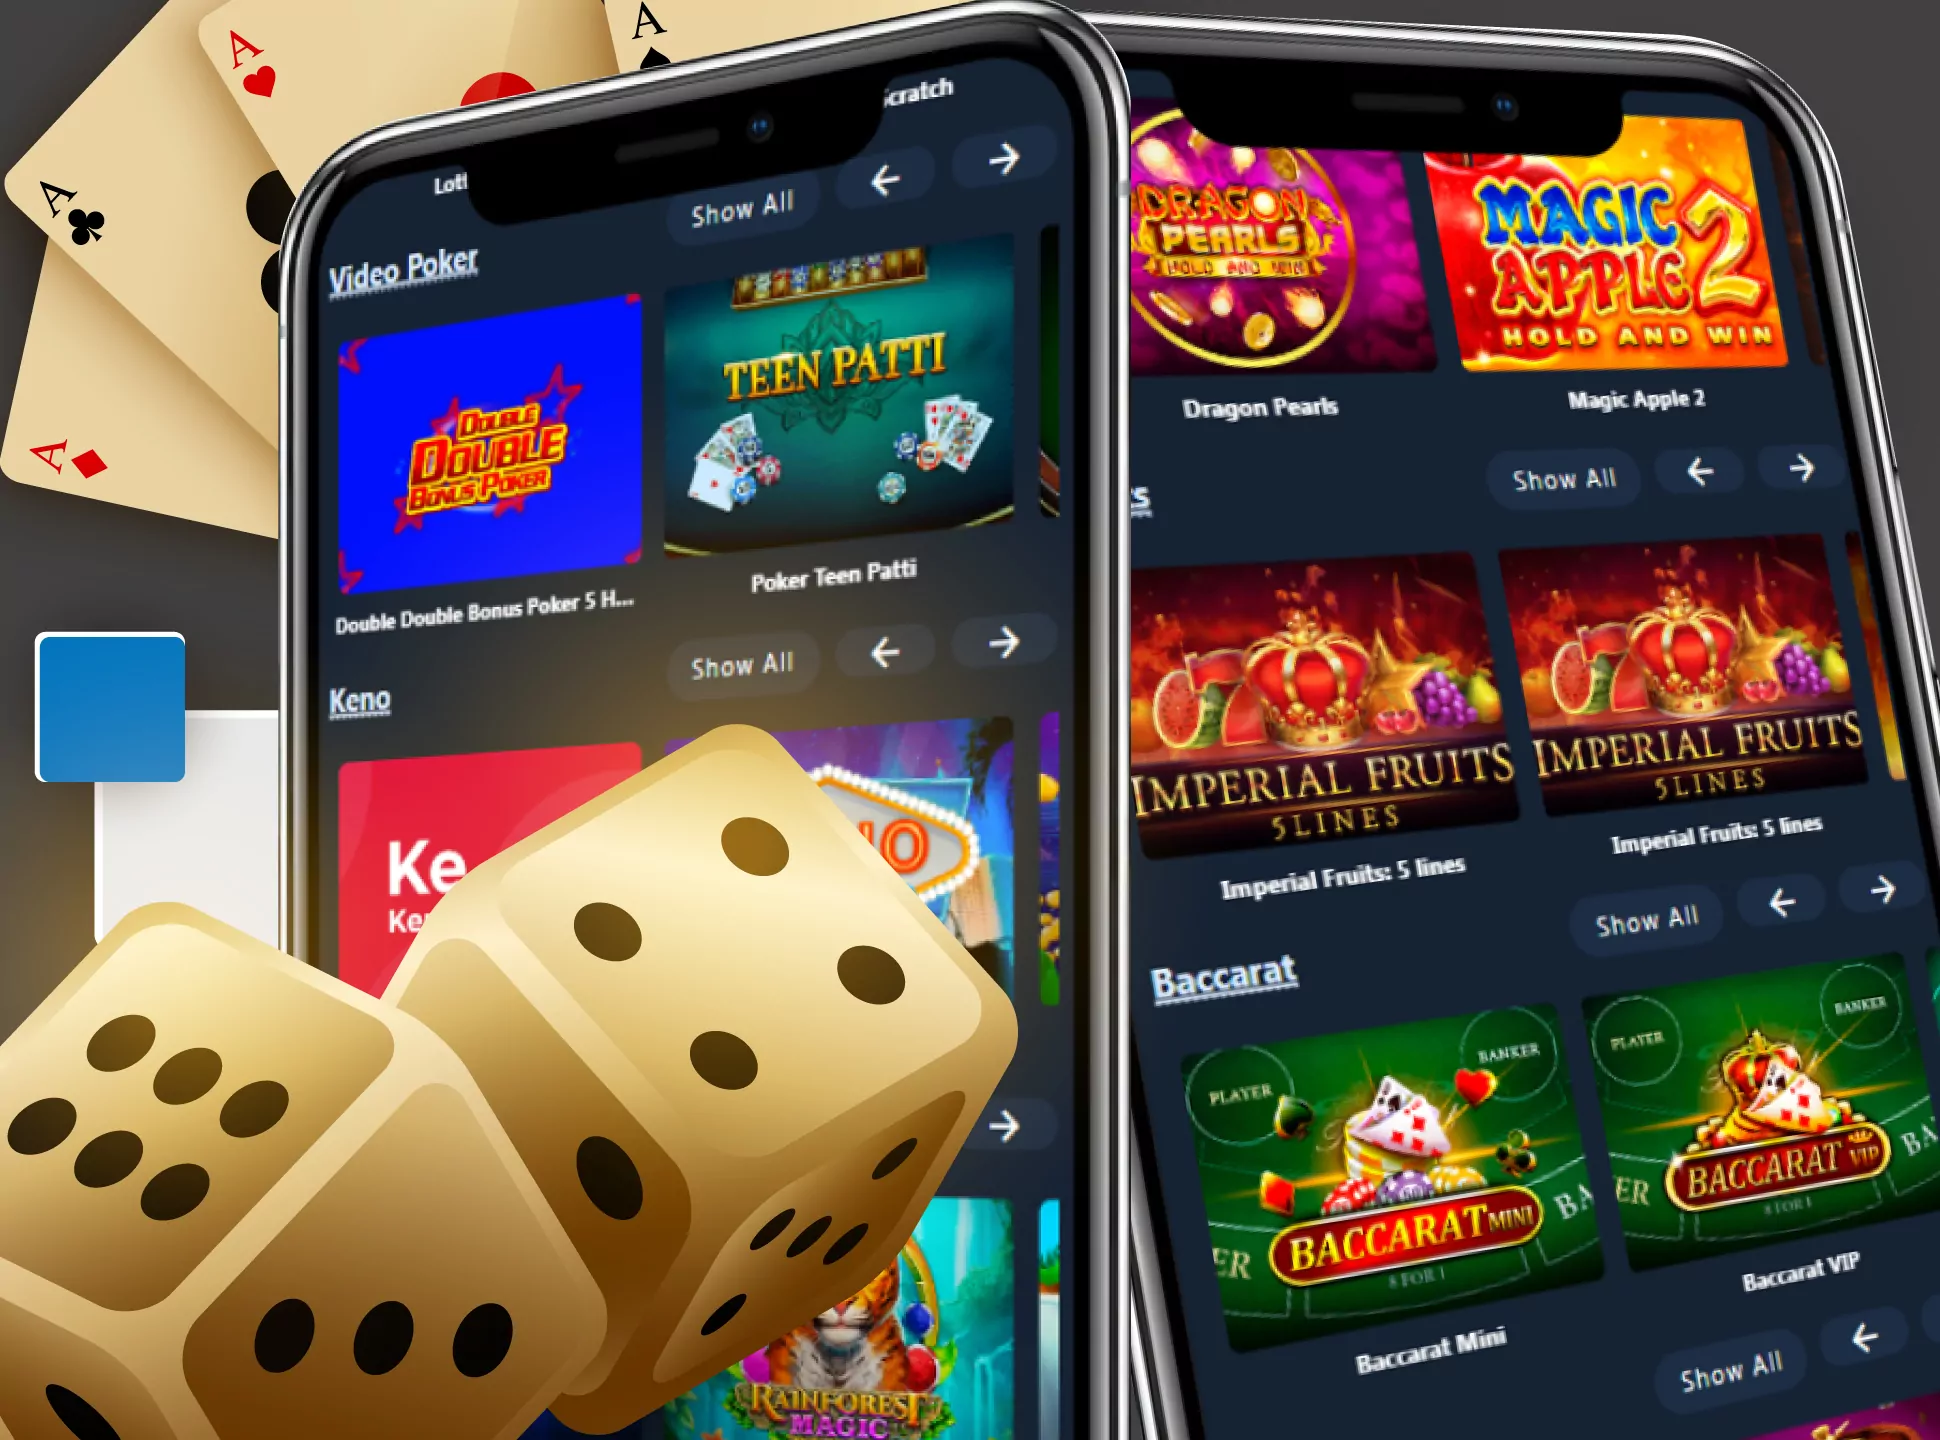 You can easilly play casino games in the 4rabet mobile app.